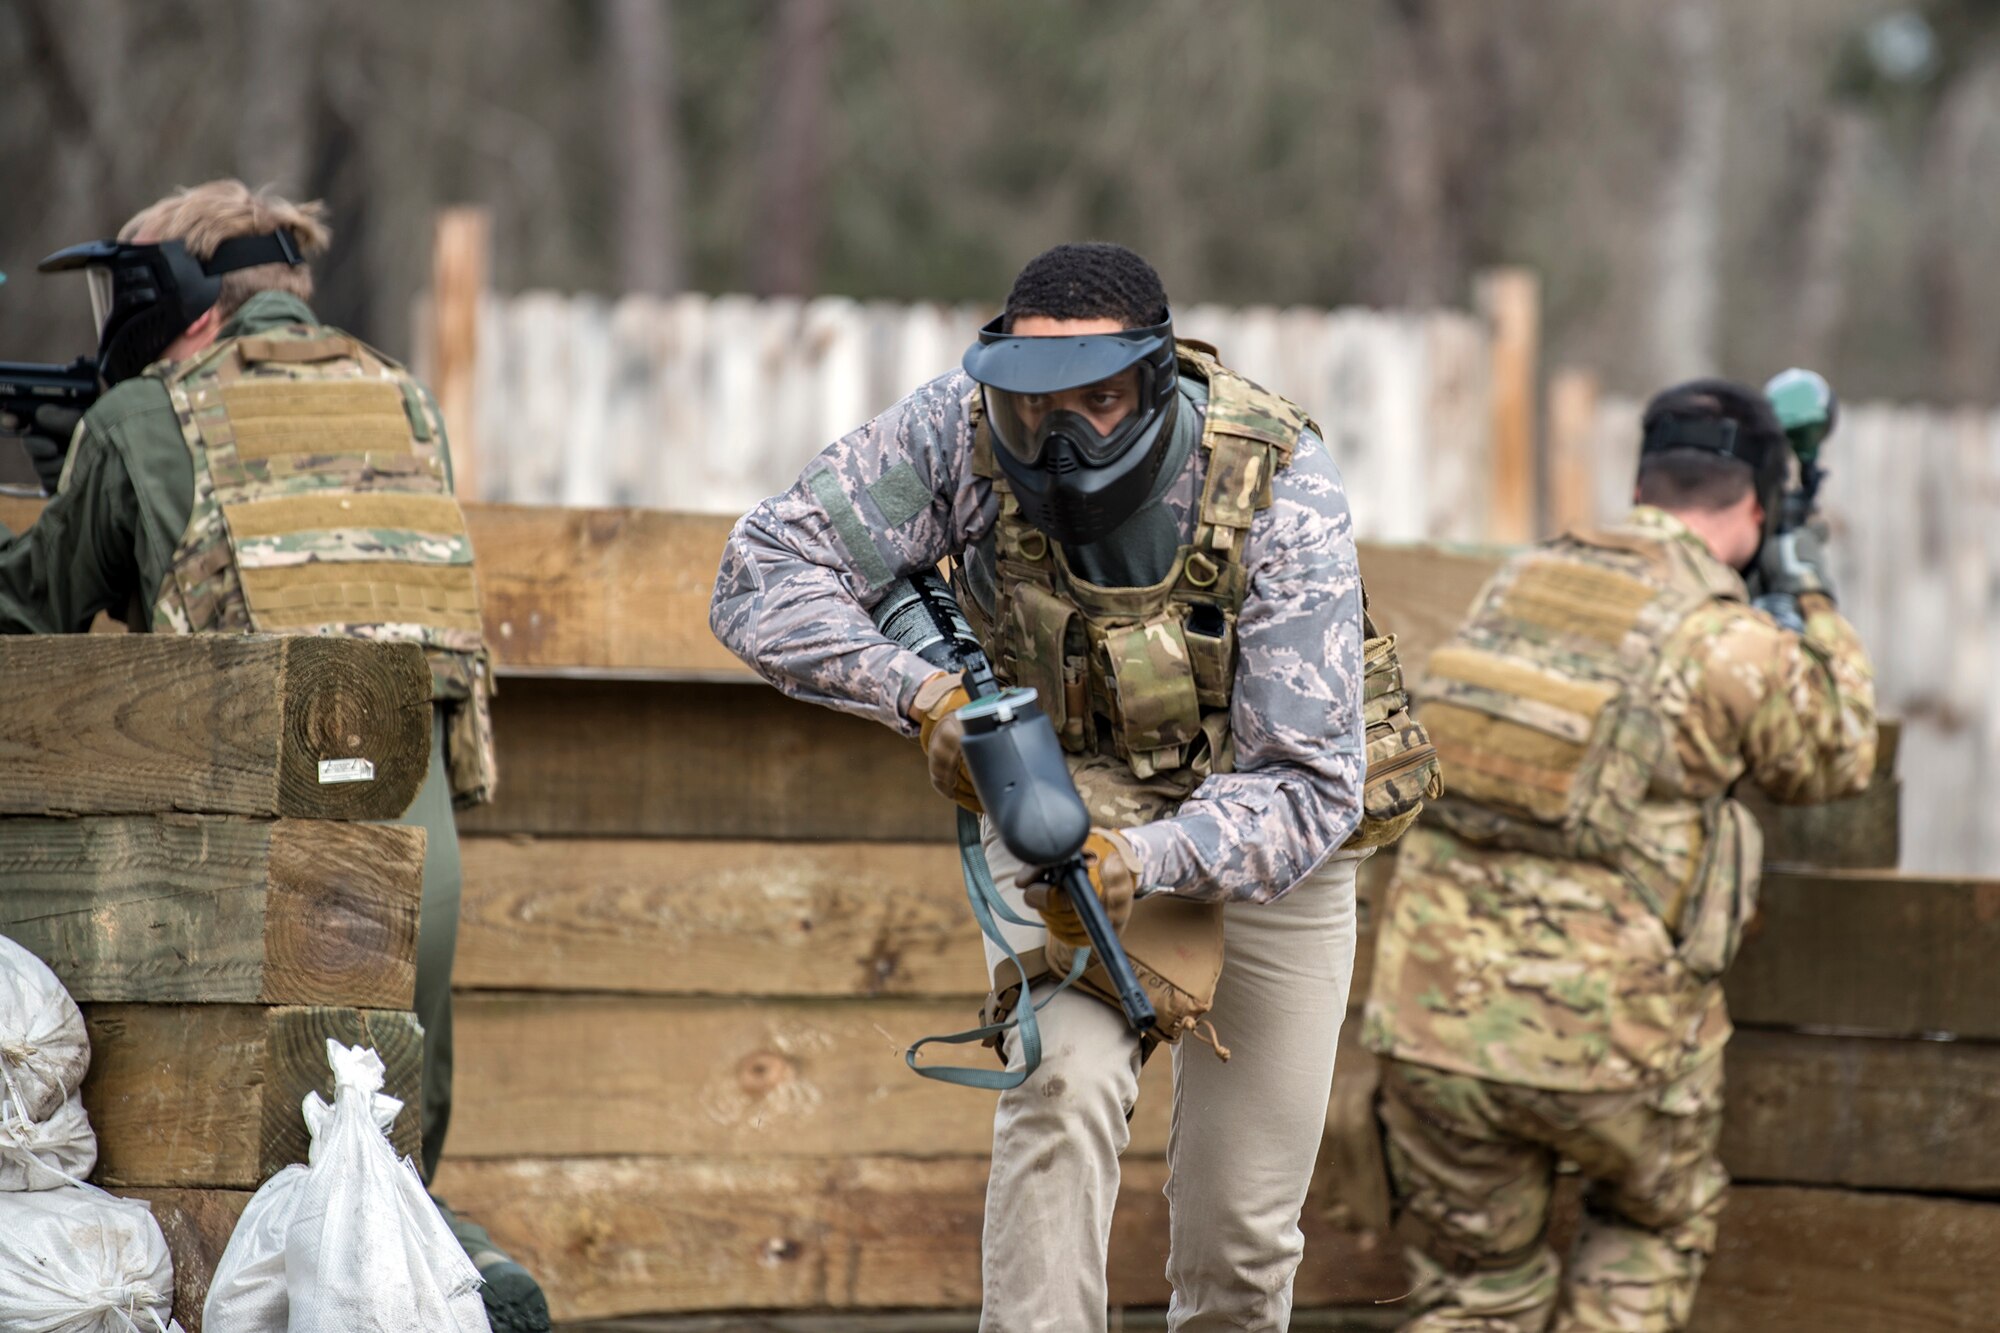 Airman 1st Class Kevin Sherrife, 23d Medical Operations Squadron aerospace medical technician, left, runs to cover, Feb. 14, 2018, at Moody Air Force Base, Ga.  Airmen participated in a Tactical Combat Casualty Care (TCCC) course to better prepare themselves to combat an enemy attack while still being able to apply medical care under enemy fire.
(U.S. Air Force photo by Airman Eugene Oliver)